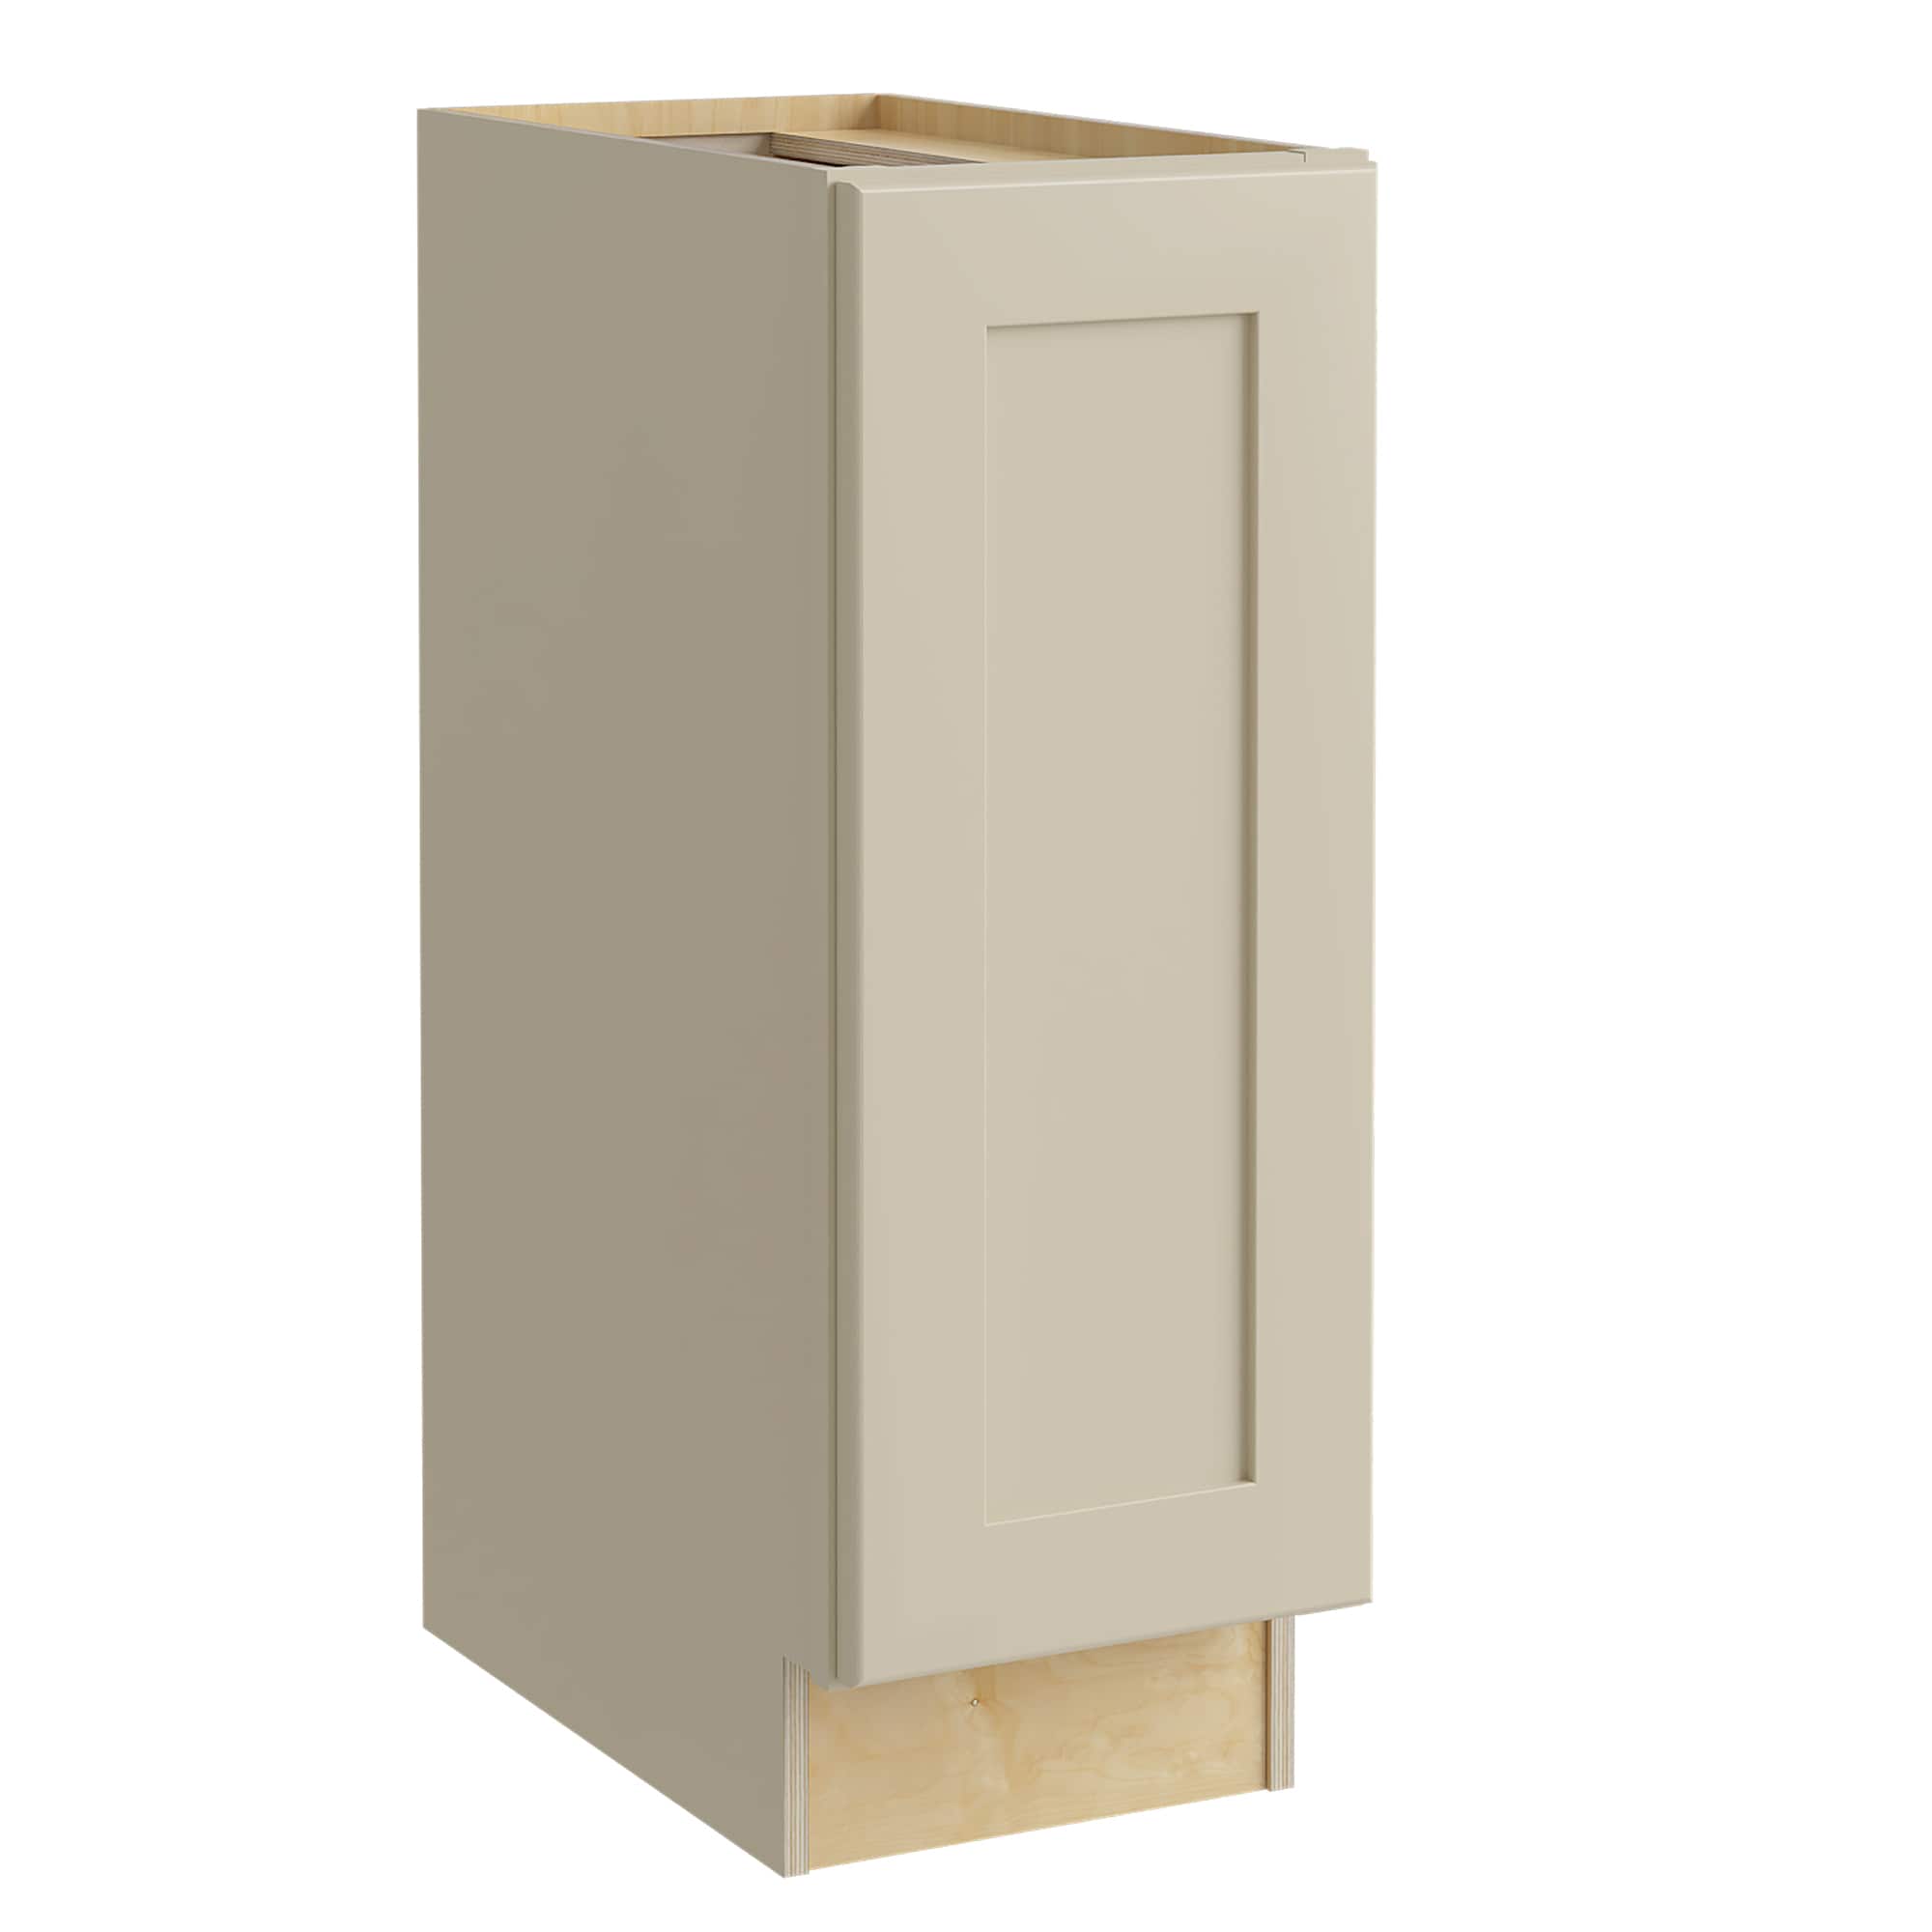 Luxxe Cabinetry 12-in W x 34.5-in H x 24-in D Norfolk Blended Cream Painted Door Base Fully Assembled Semi-custom Cabinet in Off-White | B12FHL-NBC